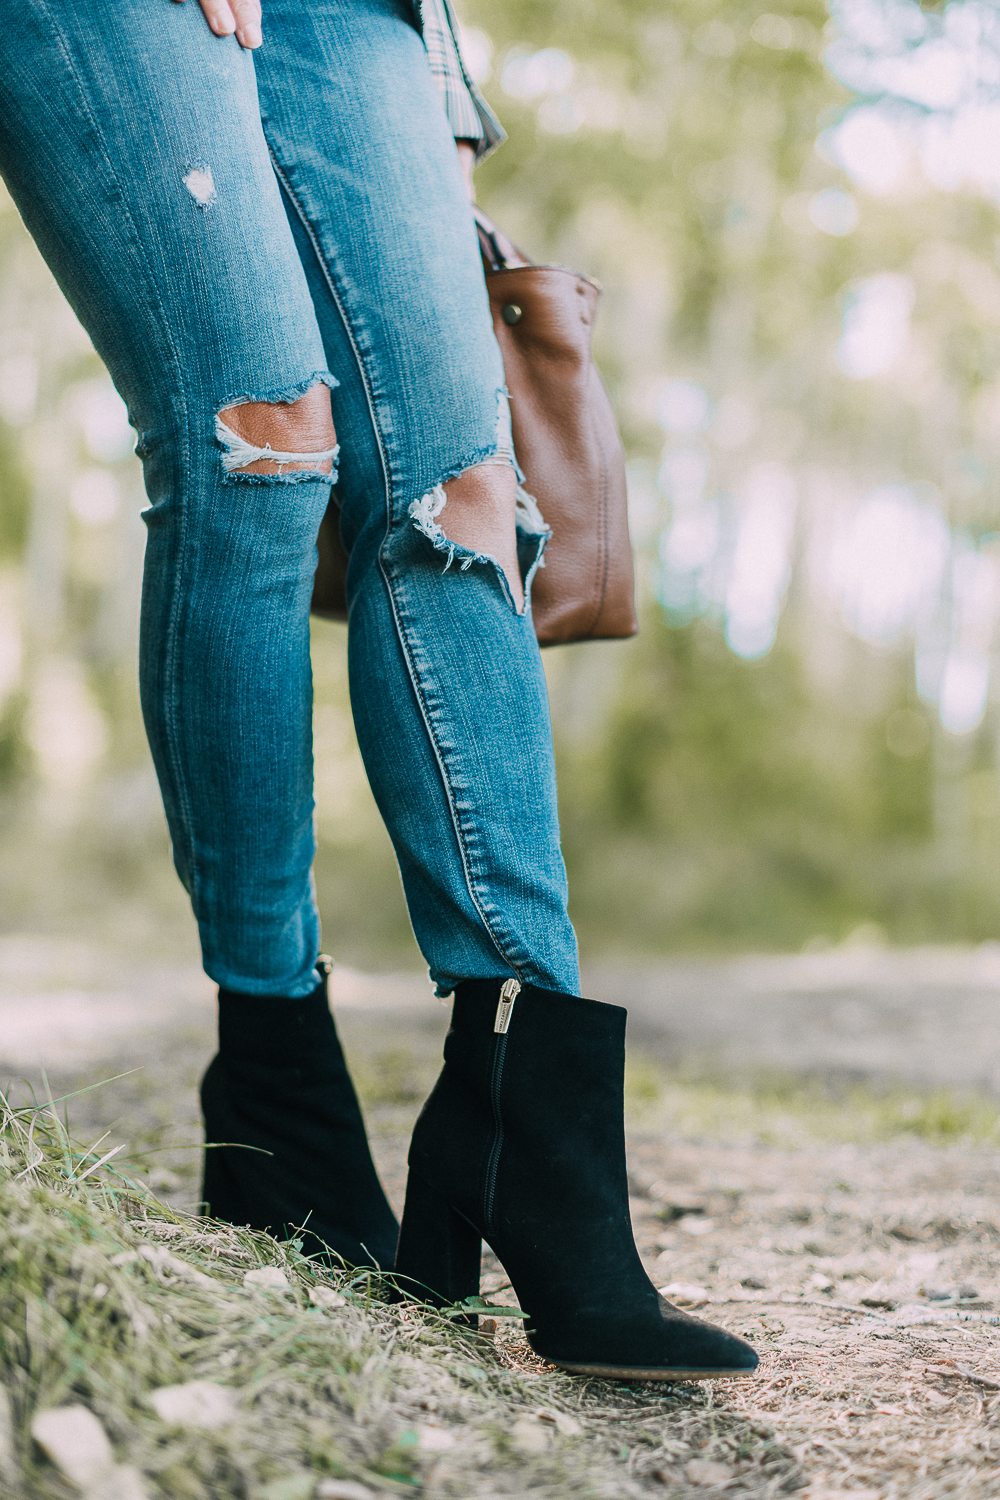 Fall Booties 2018 featuring Vince Camuto black suede side zip booties with a veronica beard plaid blazer and blankNYC jeans on fashion blogger over 40, Erin Busbee of BusbeeStyle.com, shoes you need this fall